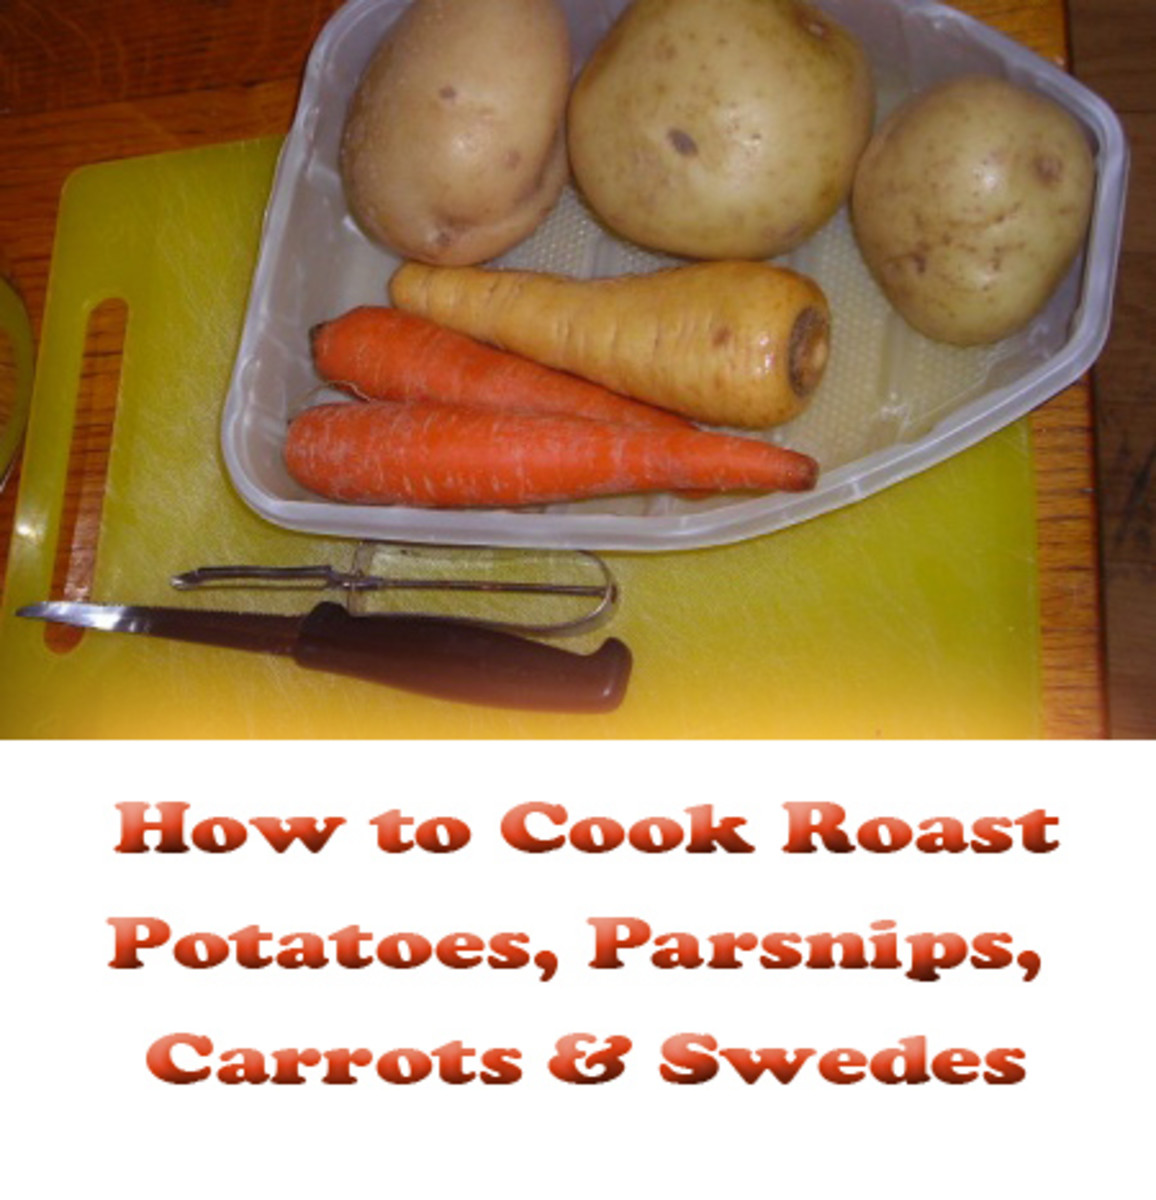 How To Cook Vegetables Like Potatoes Carrots And Parsnips Delishably Food And Drink,Black Rose Meaningful Rose Tattoos For Men